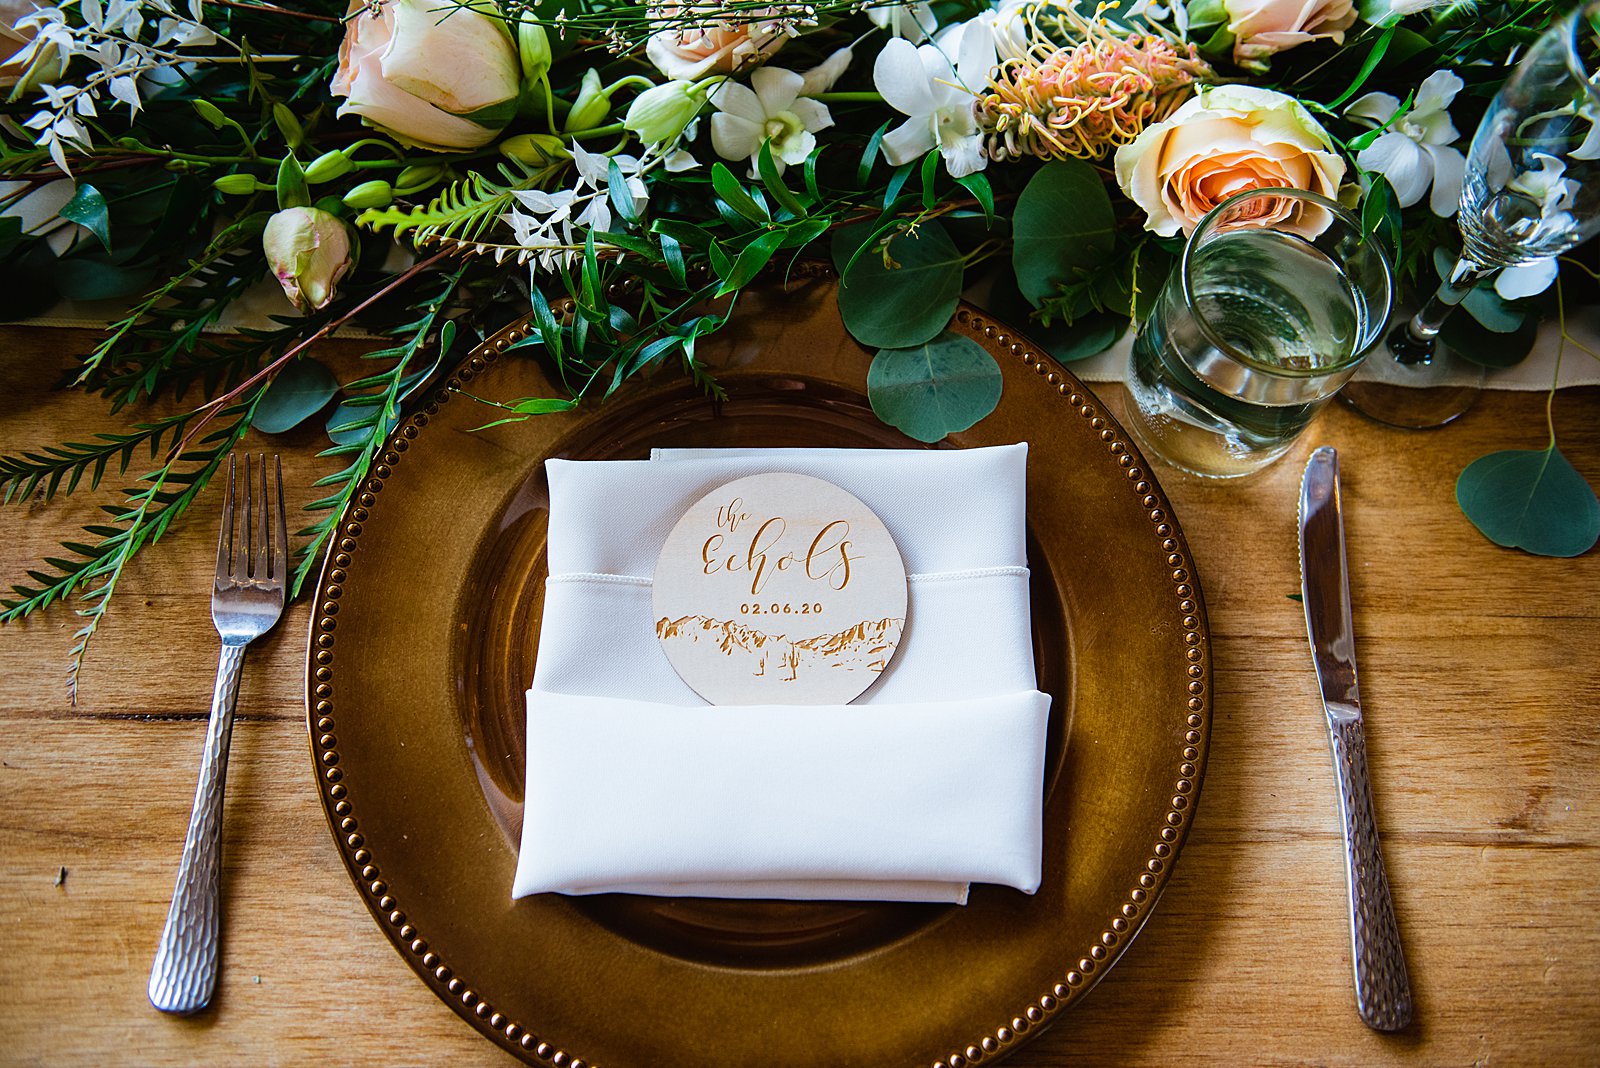 Custom wooden favors with an image of the superstition mountains table reception decorations at The Paseo wedding reception by Apache Junction wedding photographer PMA Photography.